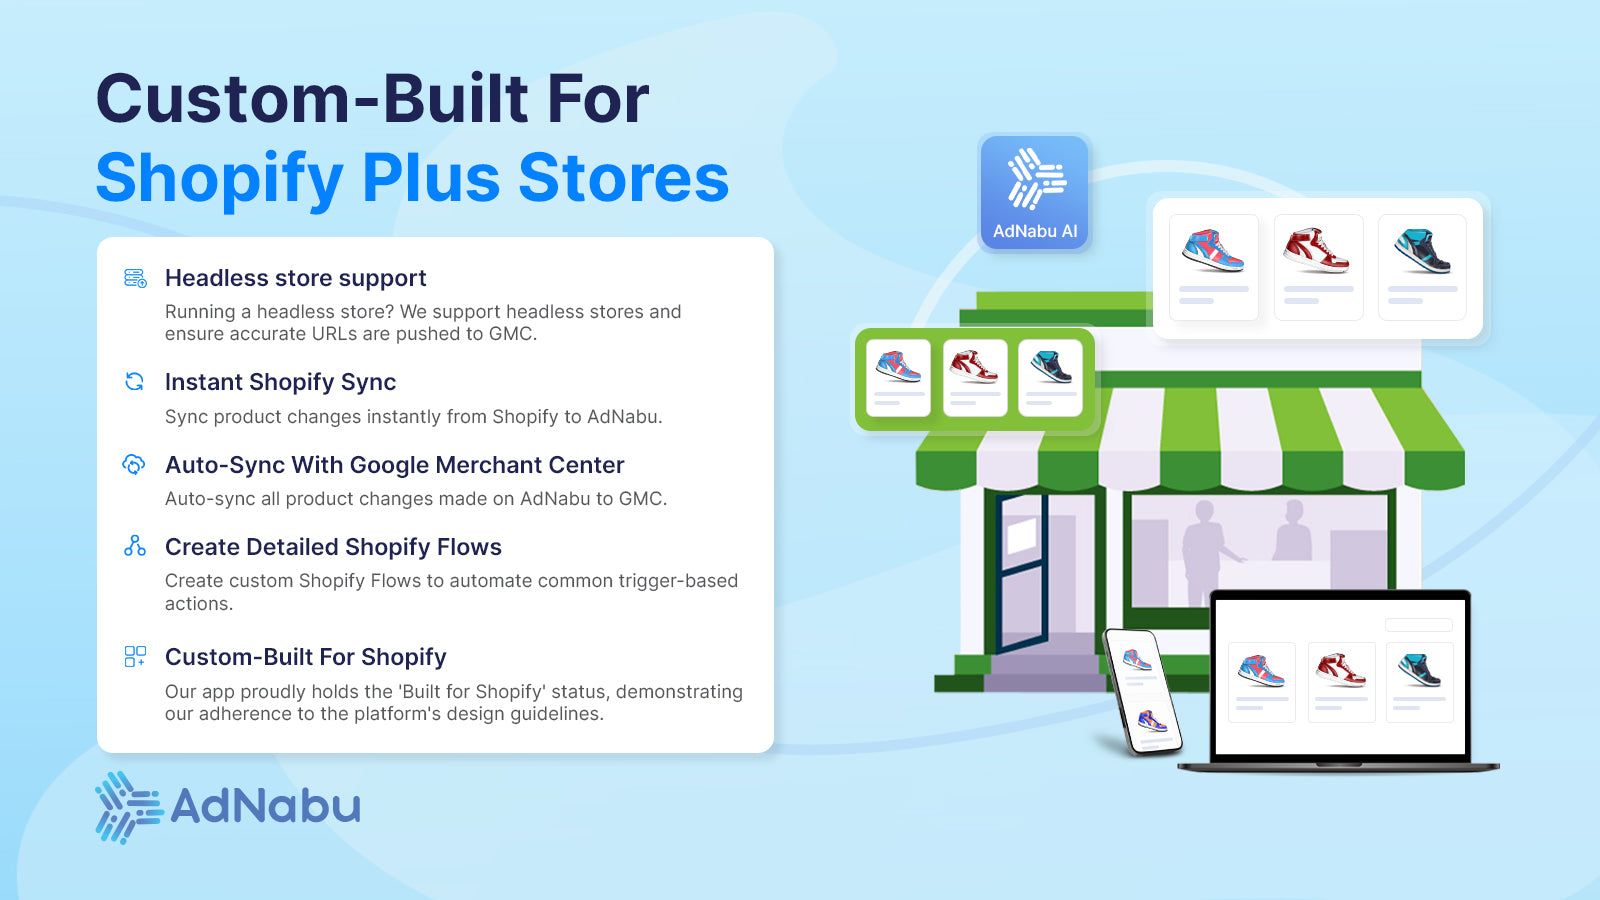 Built for Shopify Plus stores with headless store support